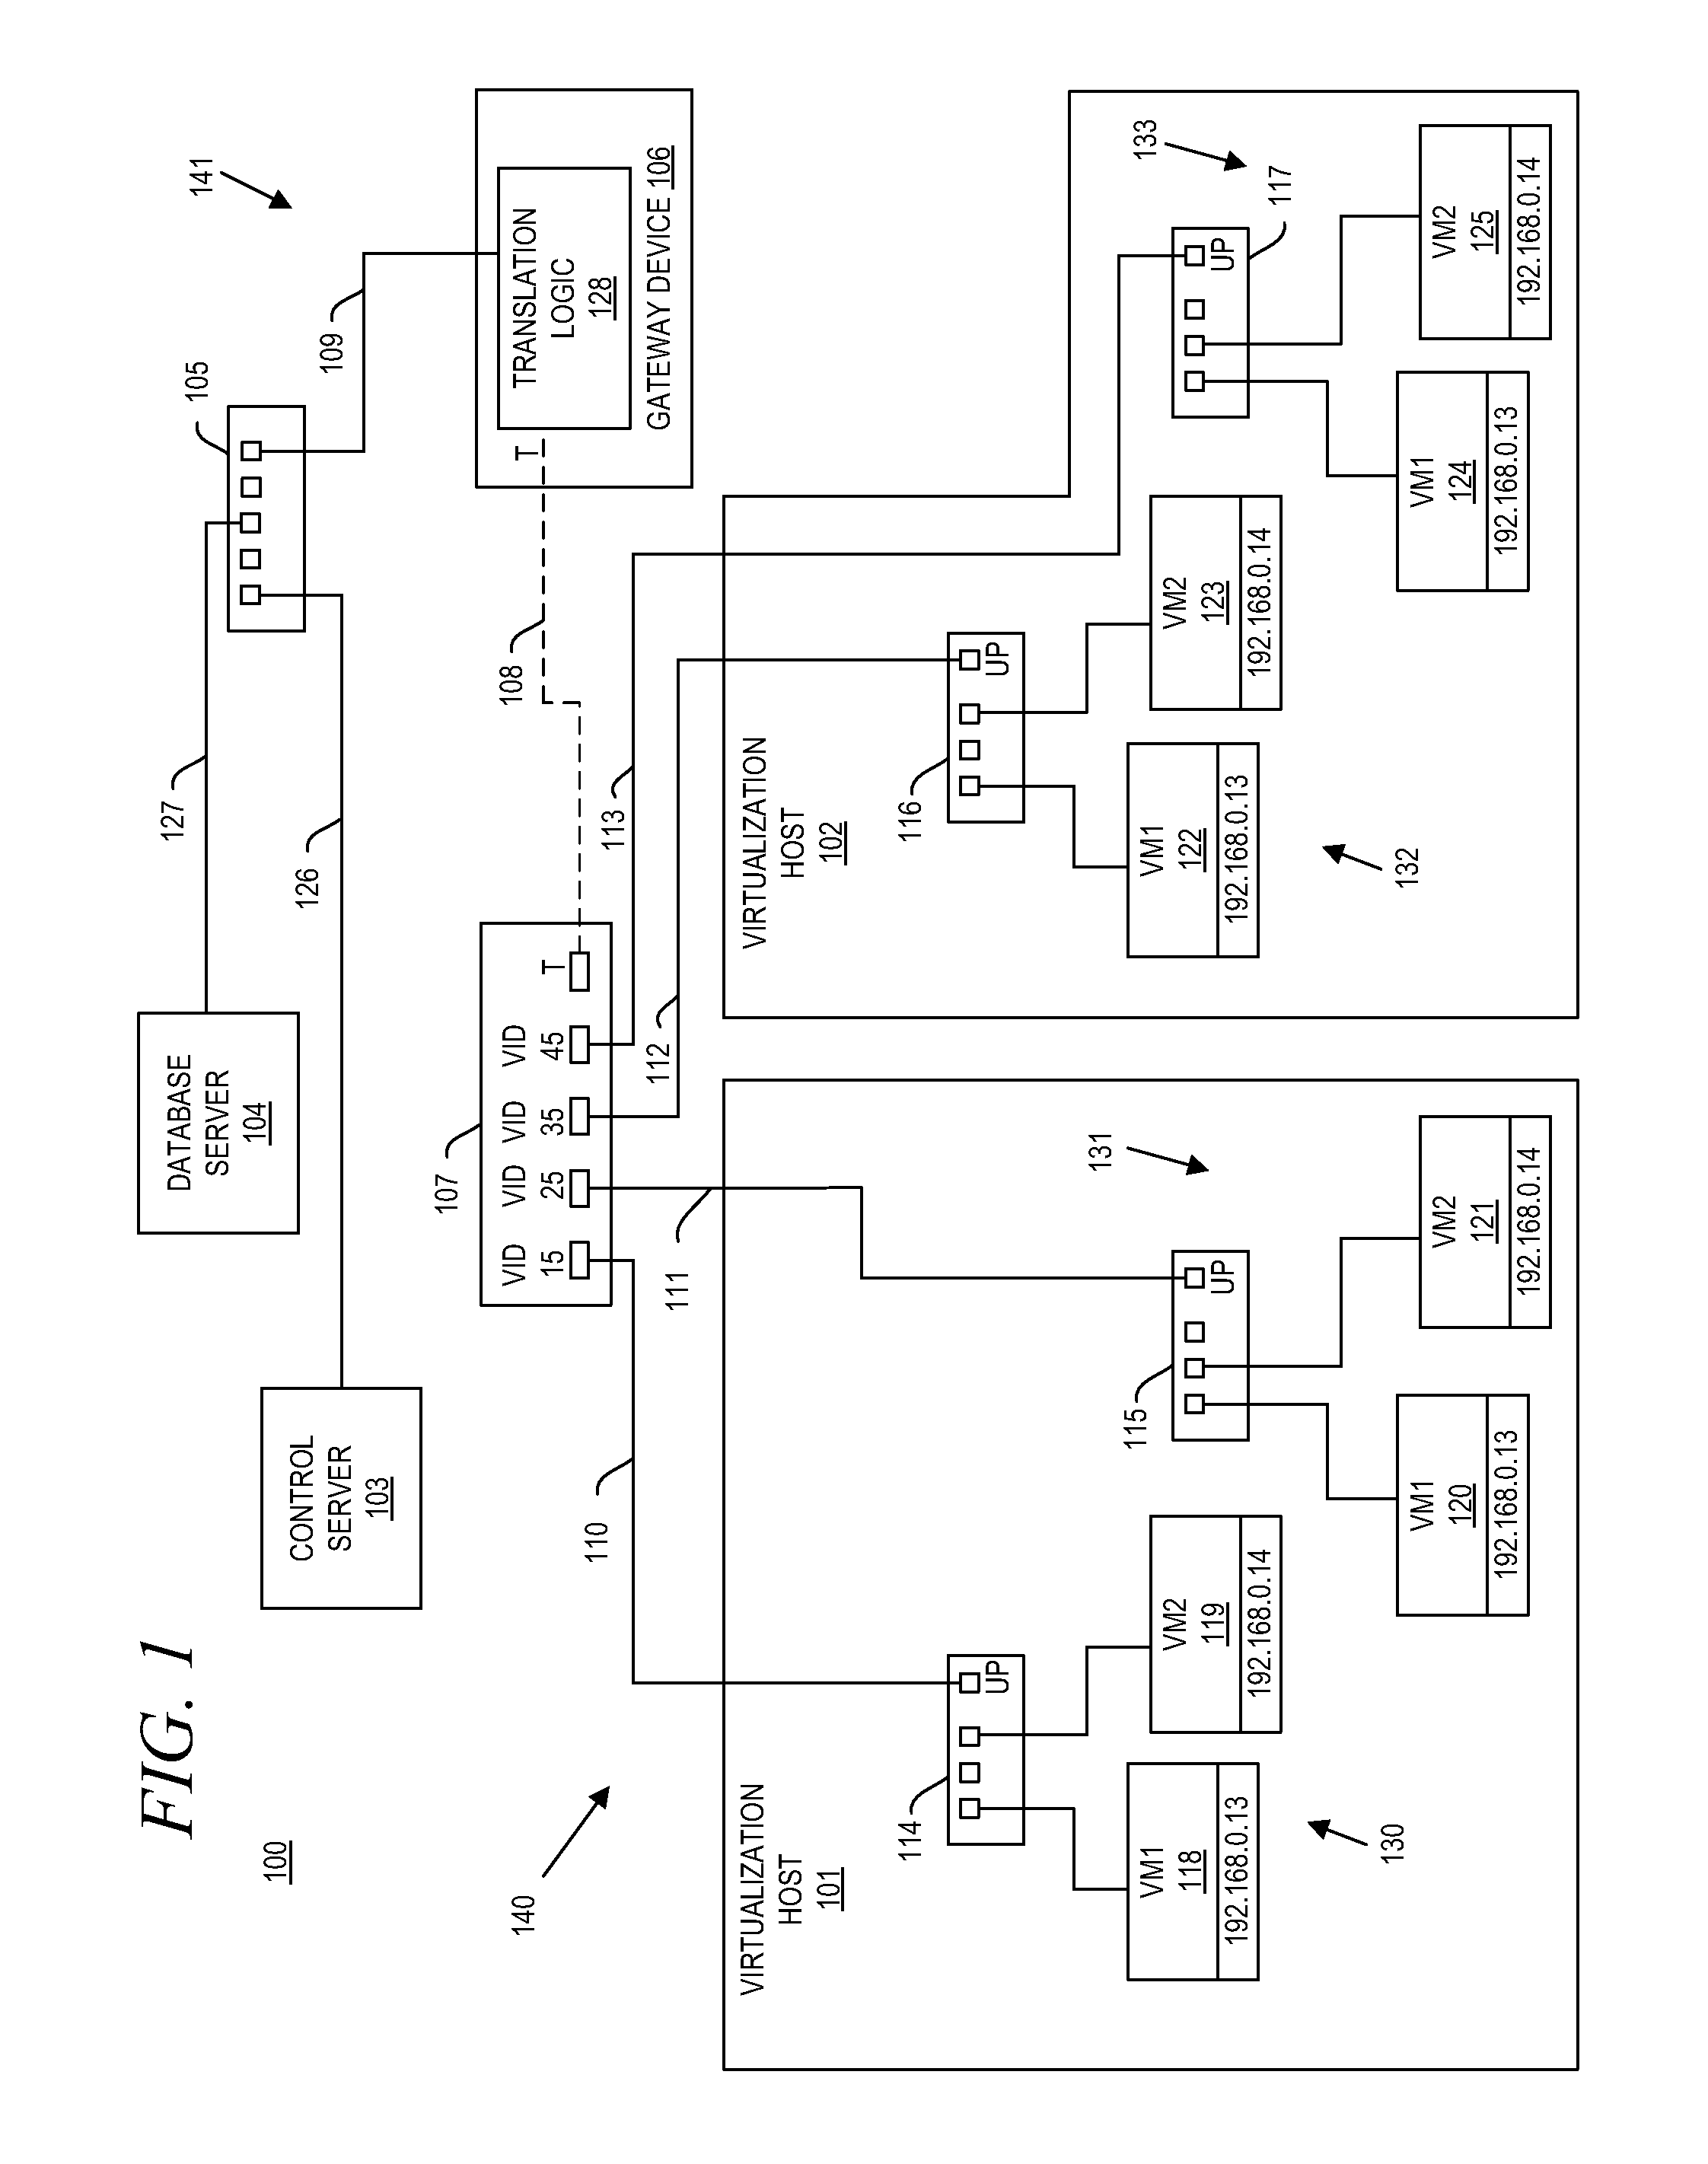 System and method for aggregating communications and for translating between overlapping internal network addresses and unique external network addresses